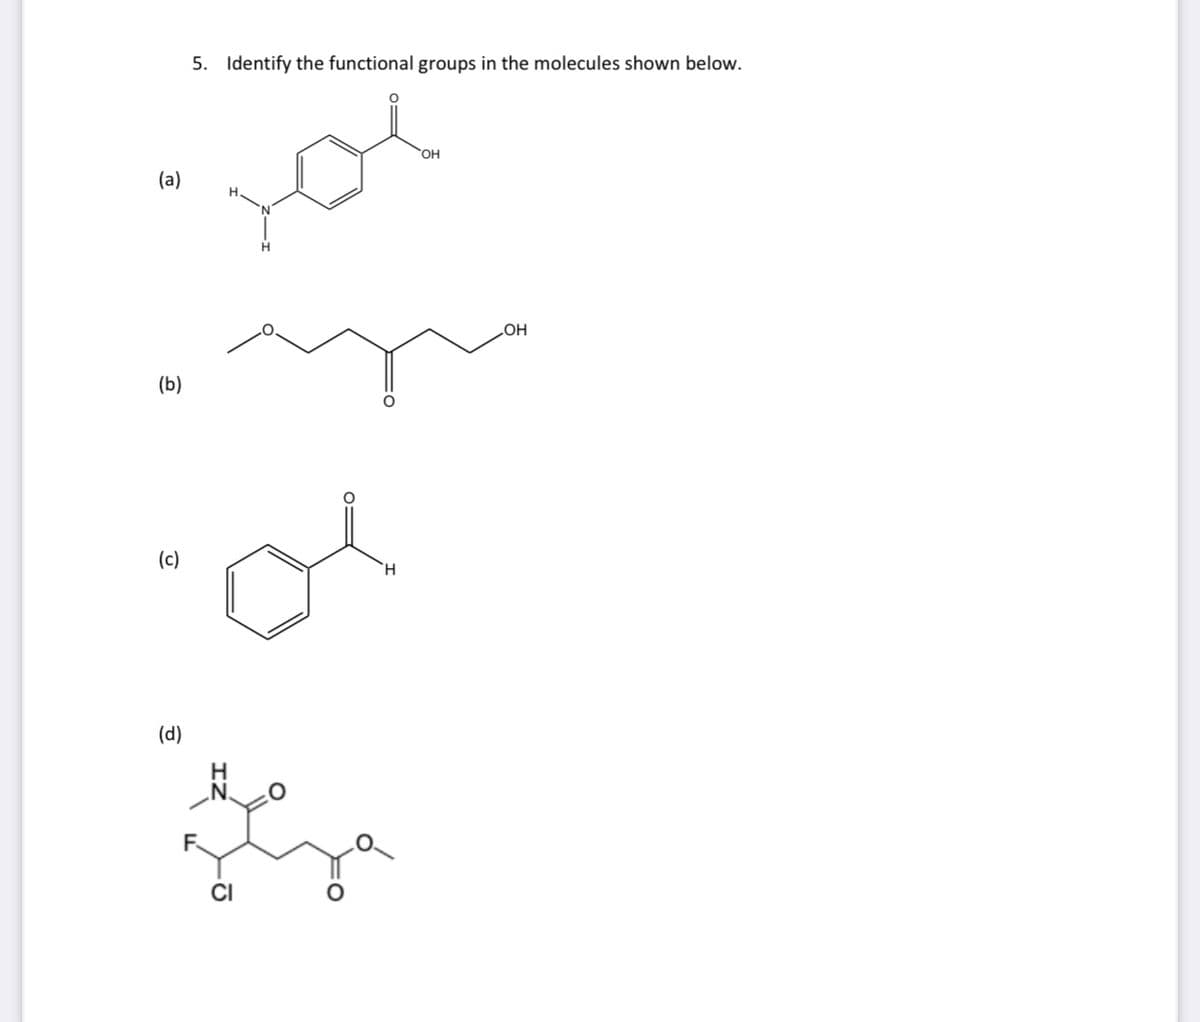 5. Identify the functional groups in the molecules shown below.
you
OH
(a)
HO
(b)
(c)
(d)
F
CI
IZ
